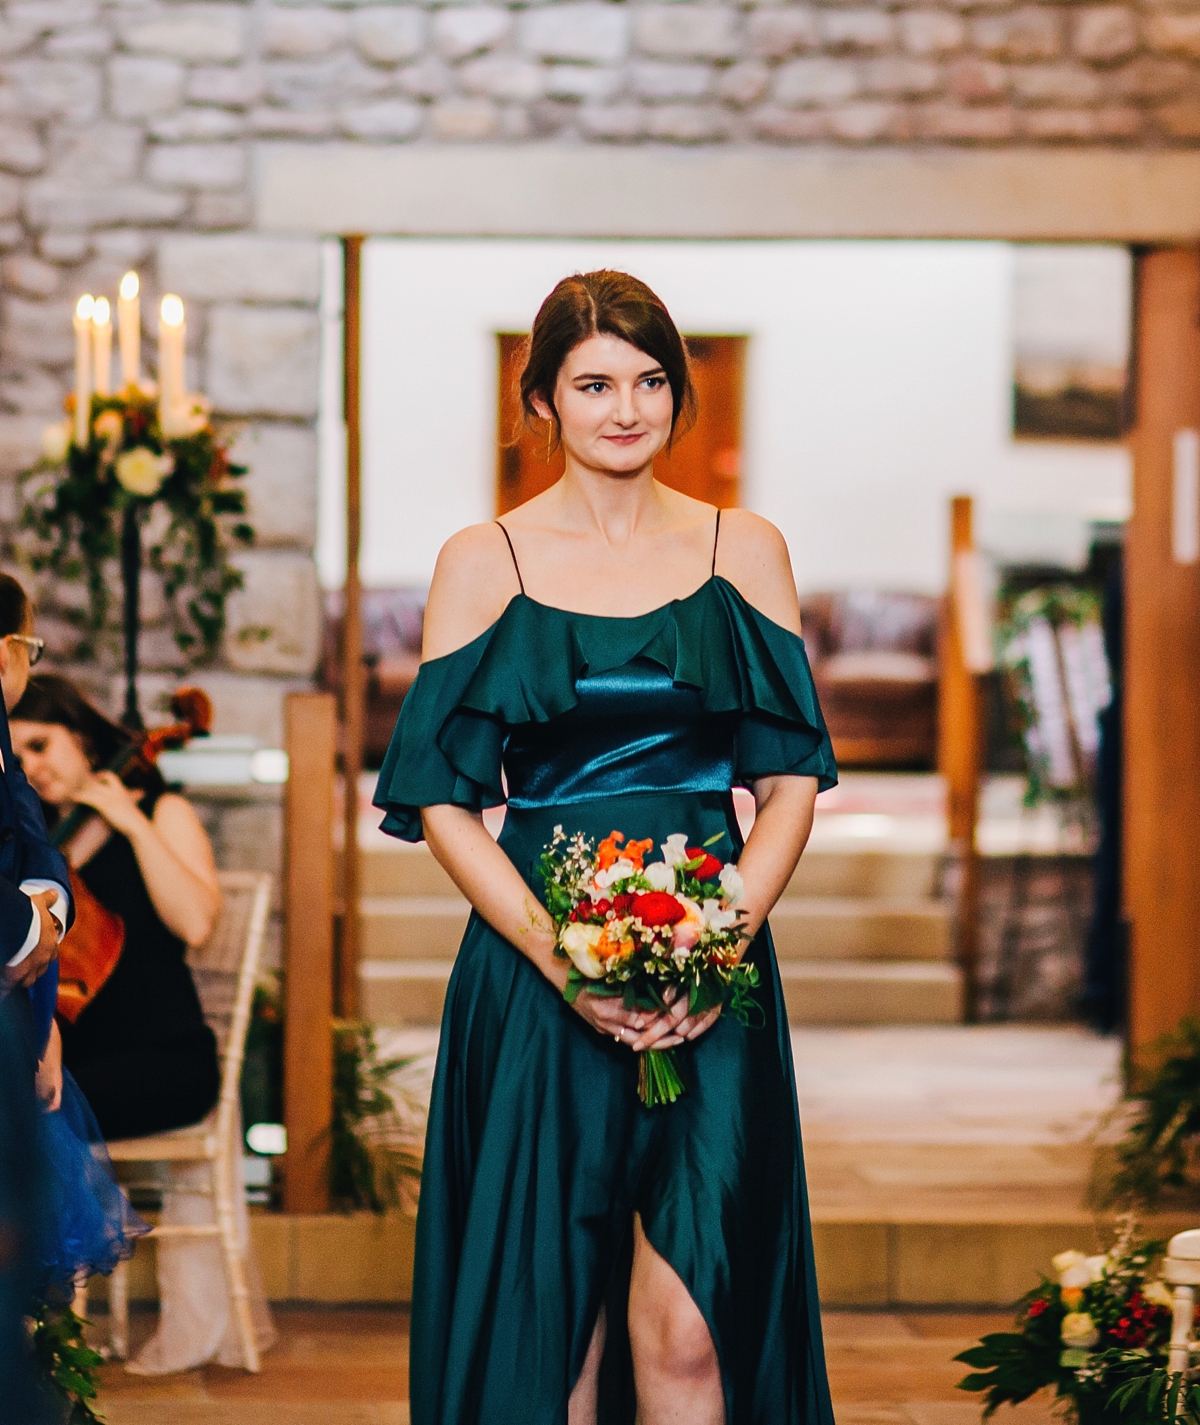 16 A romantic barn wedding and a bespoke dress by The Couture Co of Birmingham